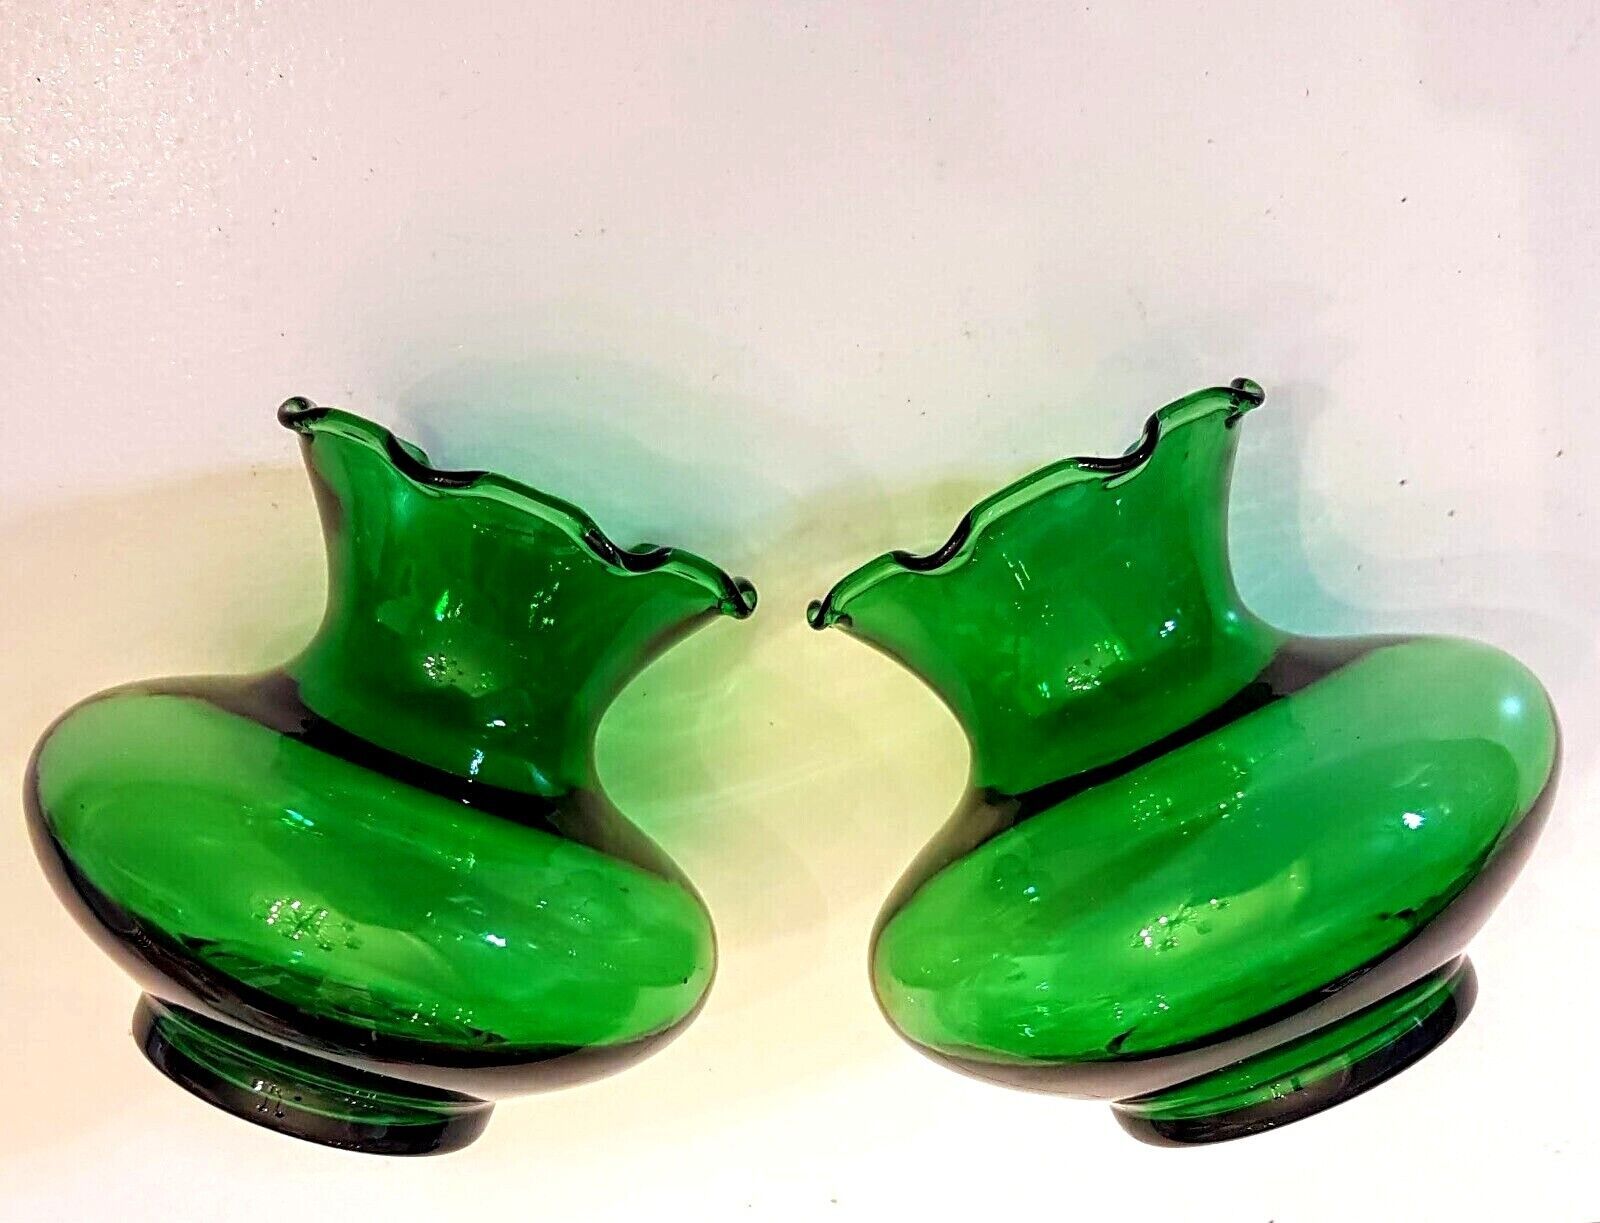 Primary image for Anchor Hocking Vase LOT Forest Emerald Green Glass Ruffled Rim 3 1/2"